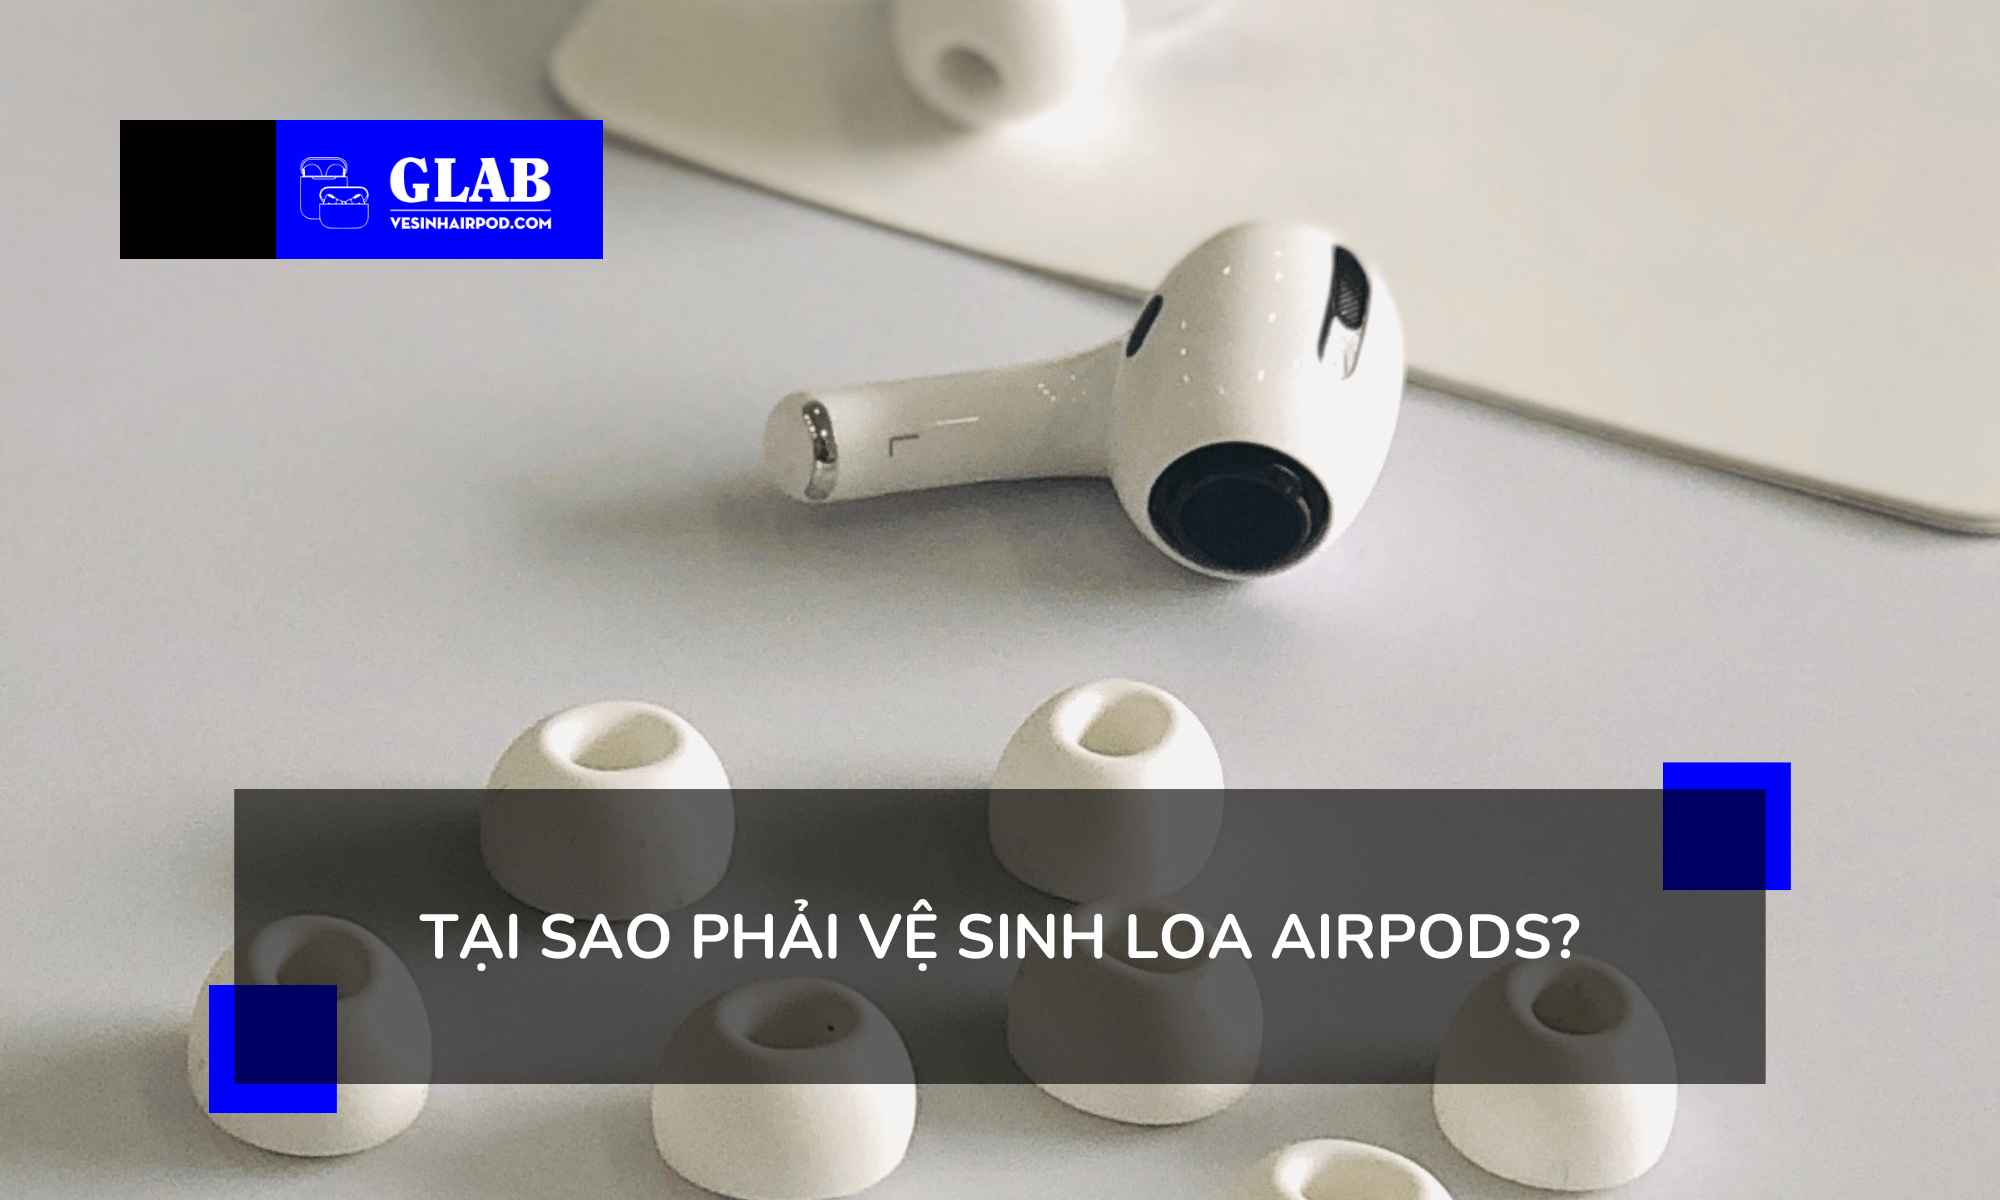 ve-sinh-loa-airpods